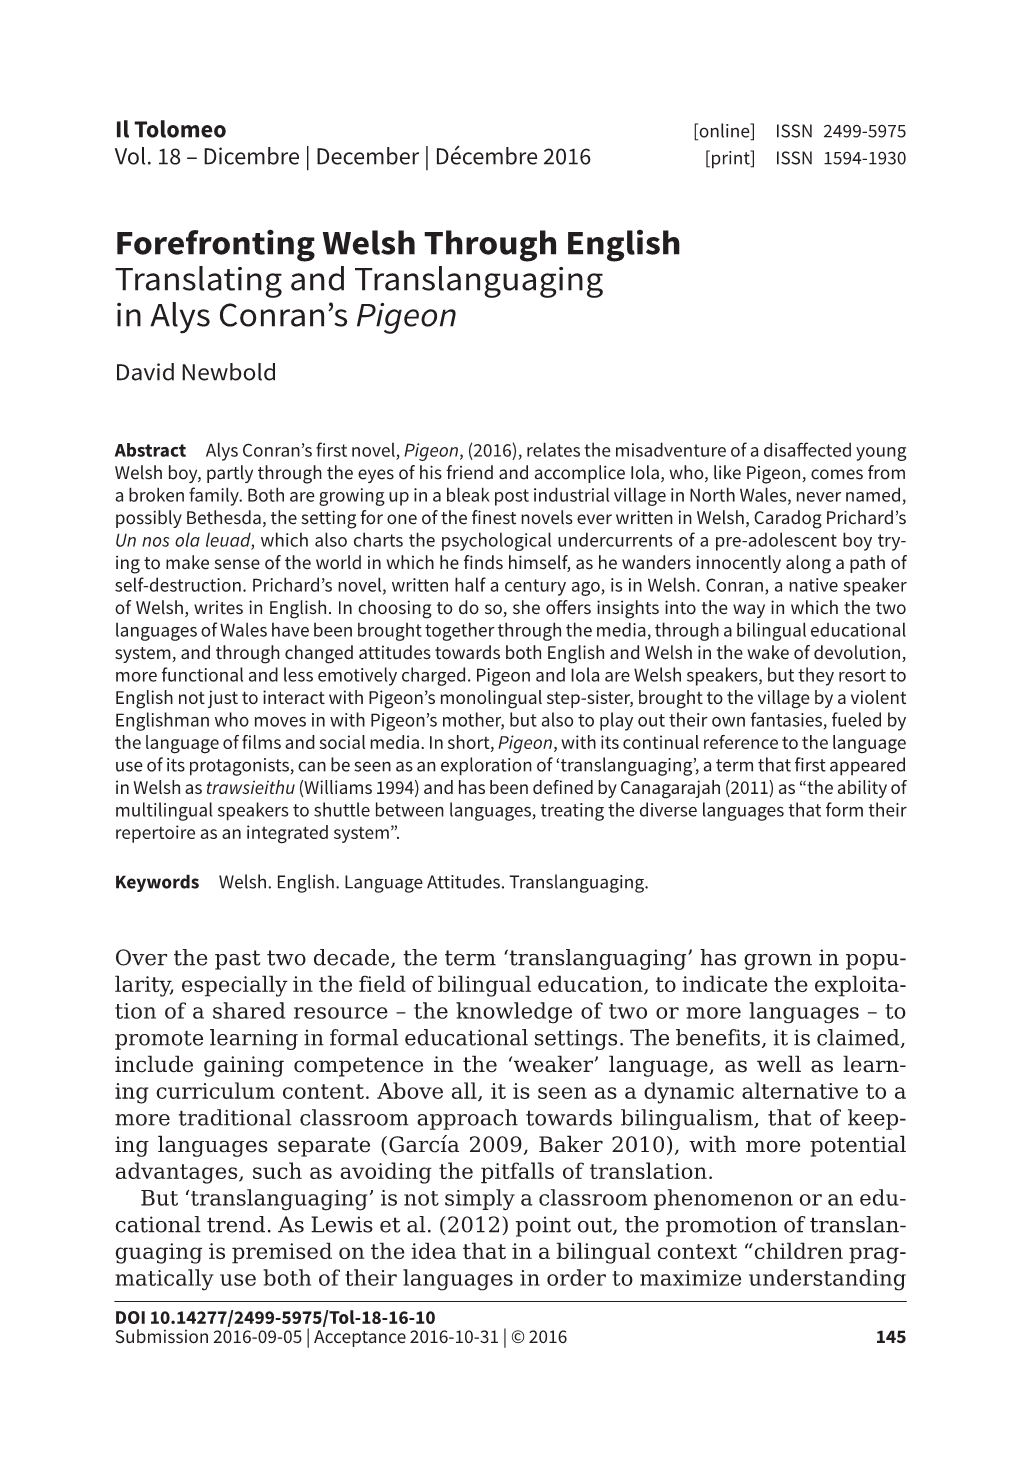 Forefronting Welsh Through English Translating and Translanguaging in Alys Conran’S Pigeon